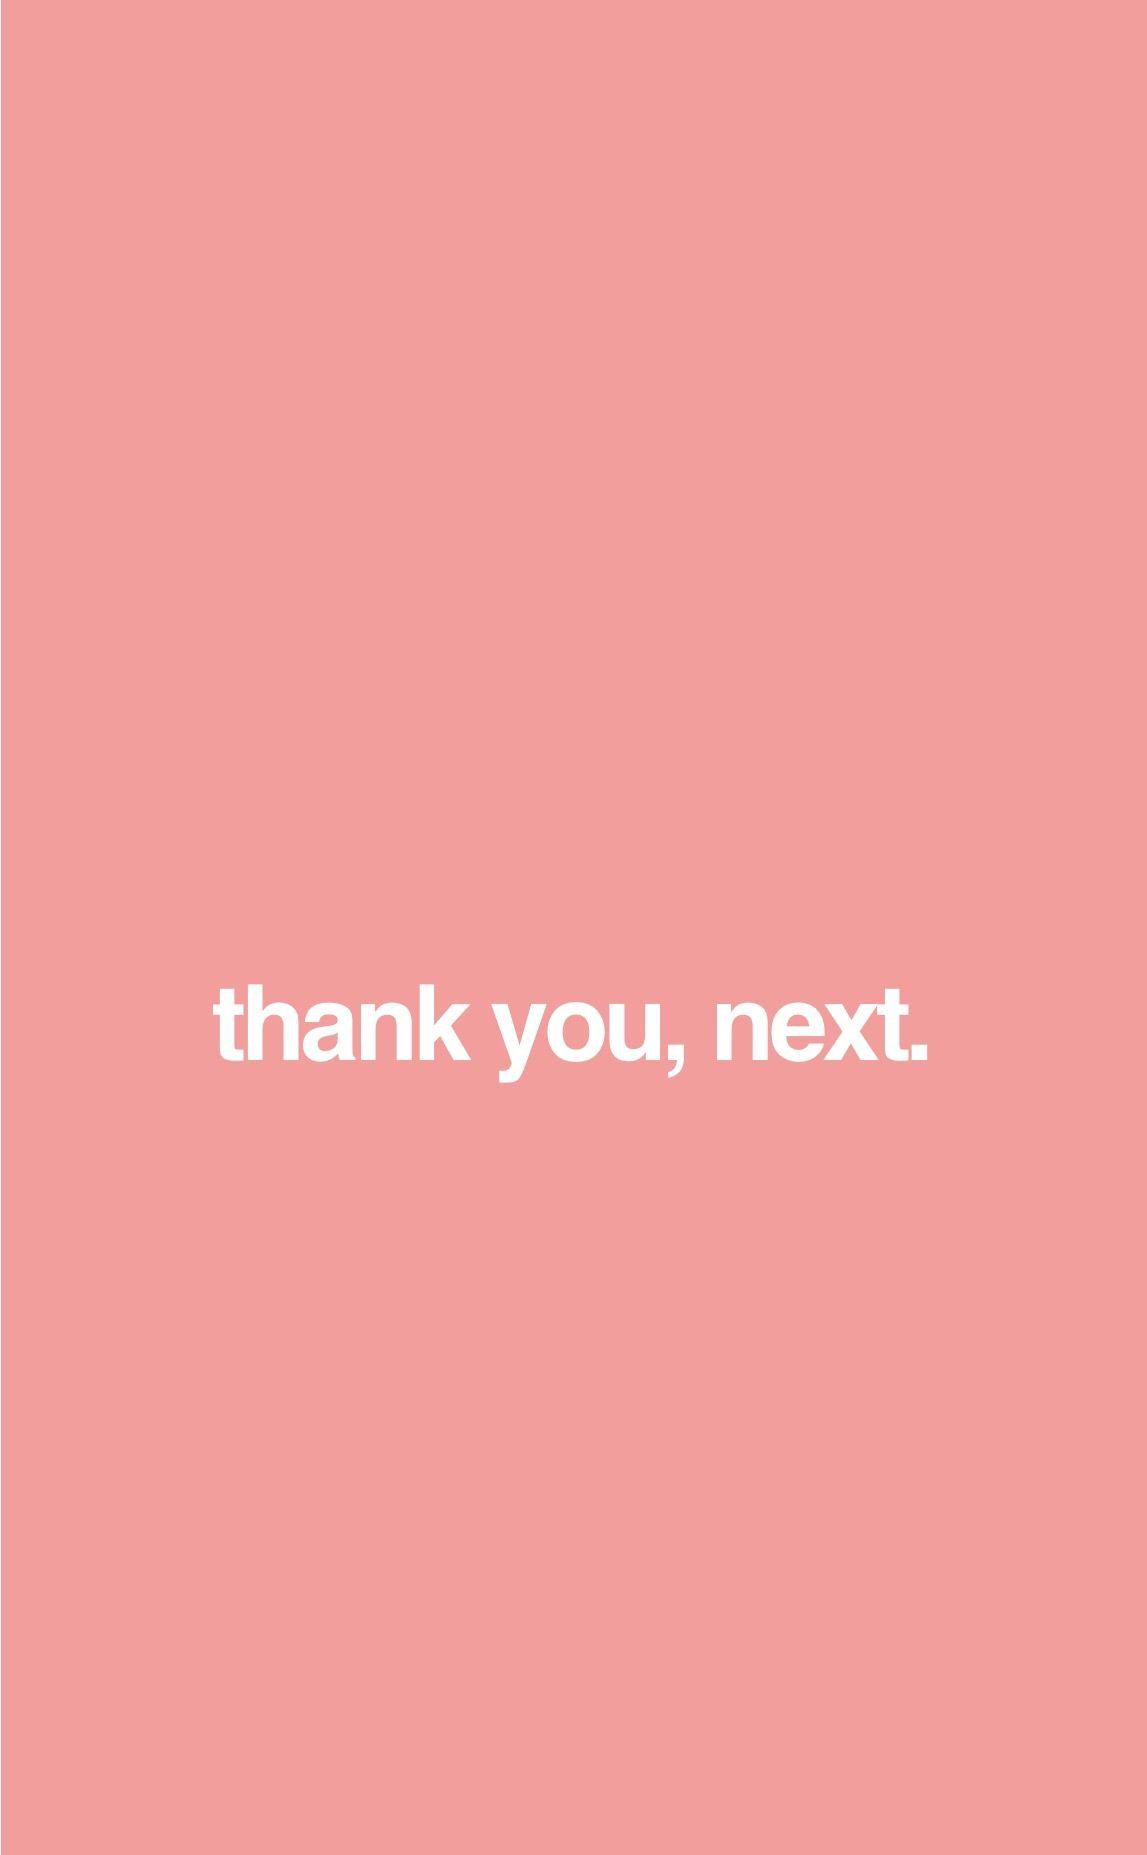 Thank You Next Wallpapers - Top Free Thank You Next Backgrounds ...